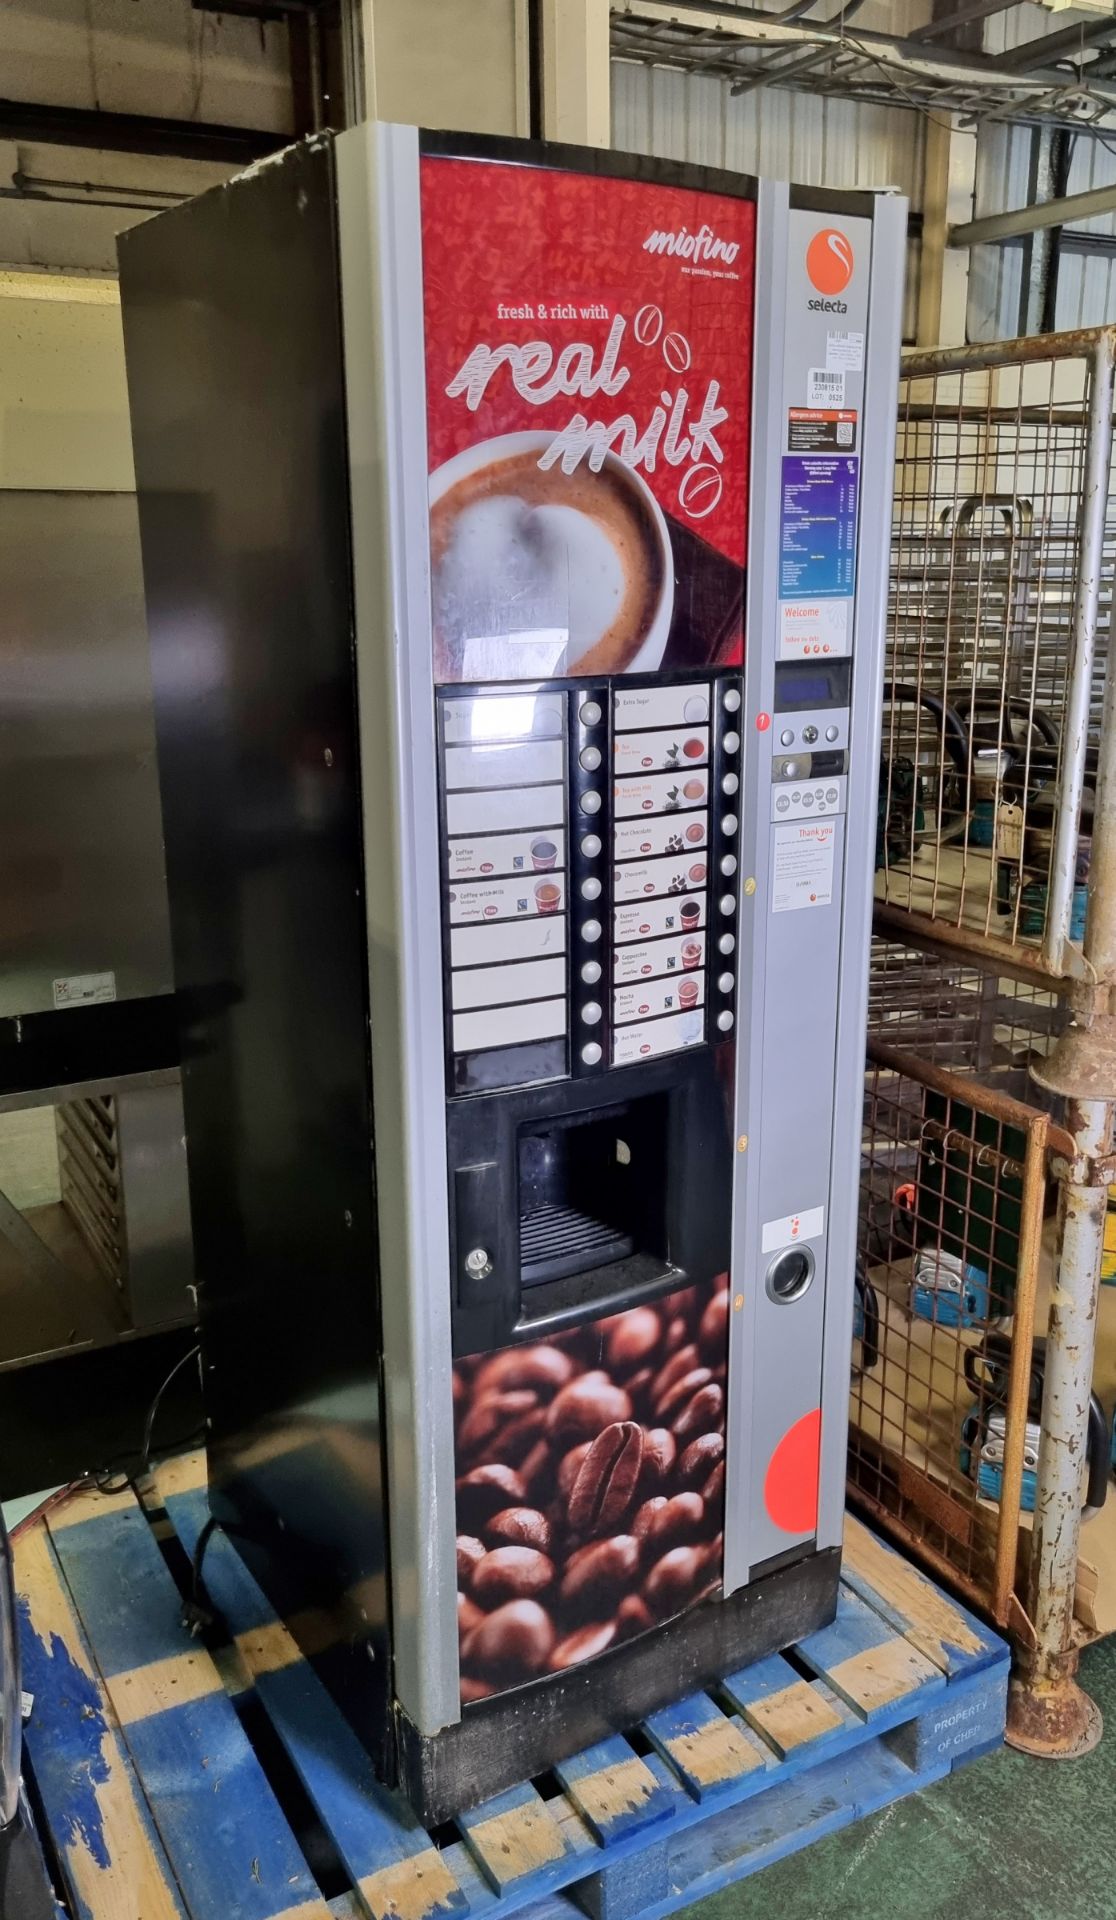 Miofino 960406 Selecta drinks vending machine - coin operated - 240V 50Hz - L 650 x W 730 x H 1830mm - Image 2 of 4